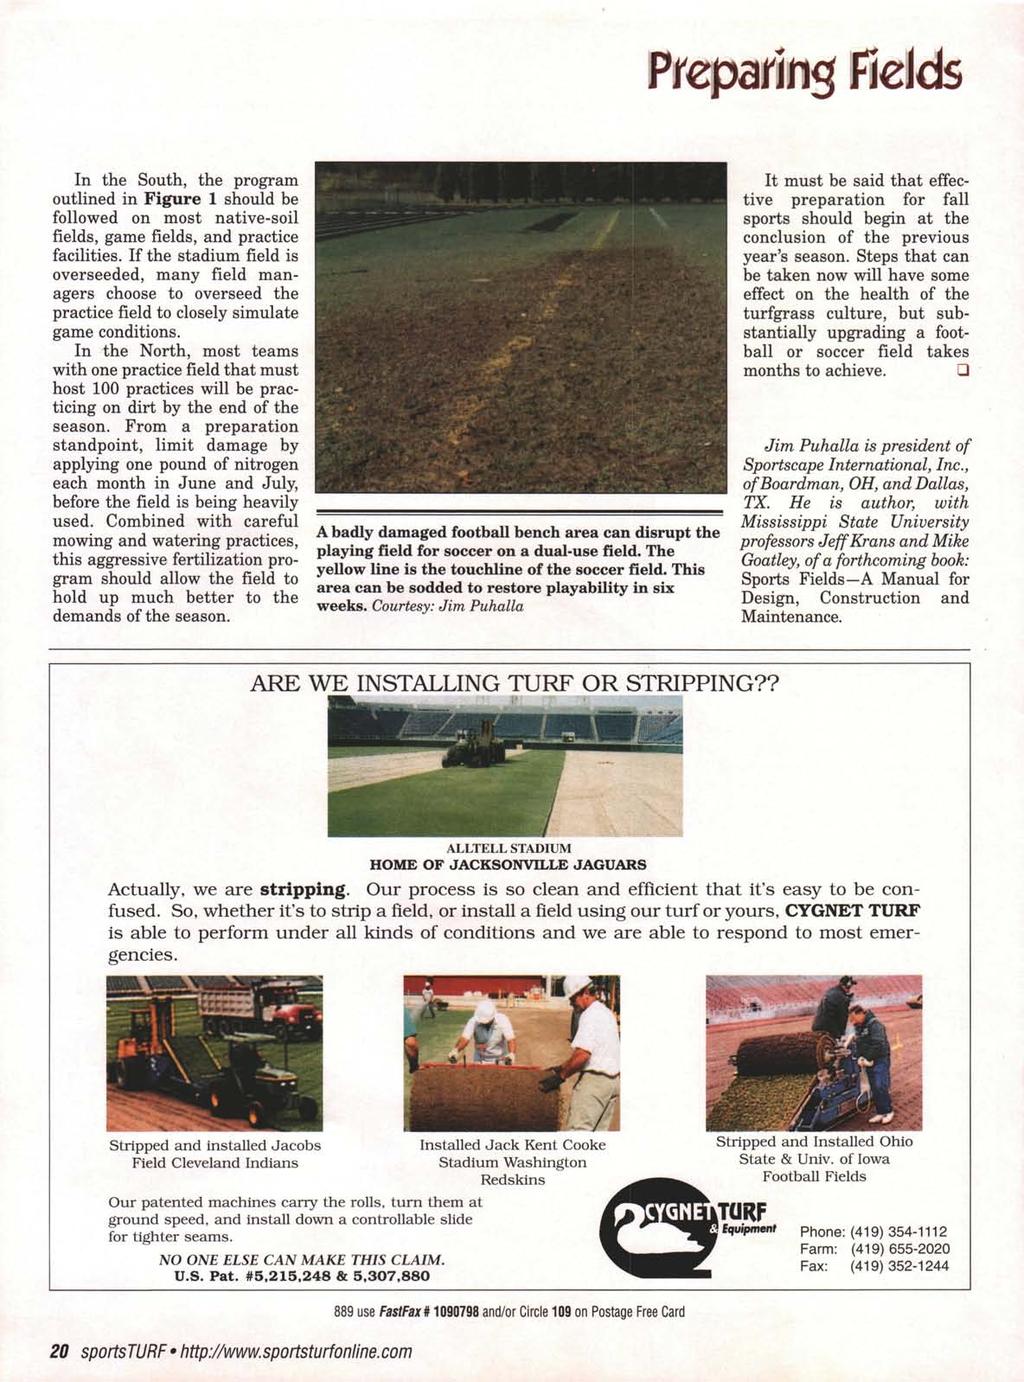 Preparing fields In the South, the program outlined in Figure 1 should be followed on most native-soil fields, game fields, and practice facilities.